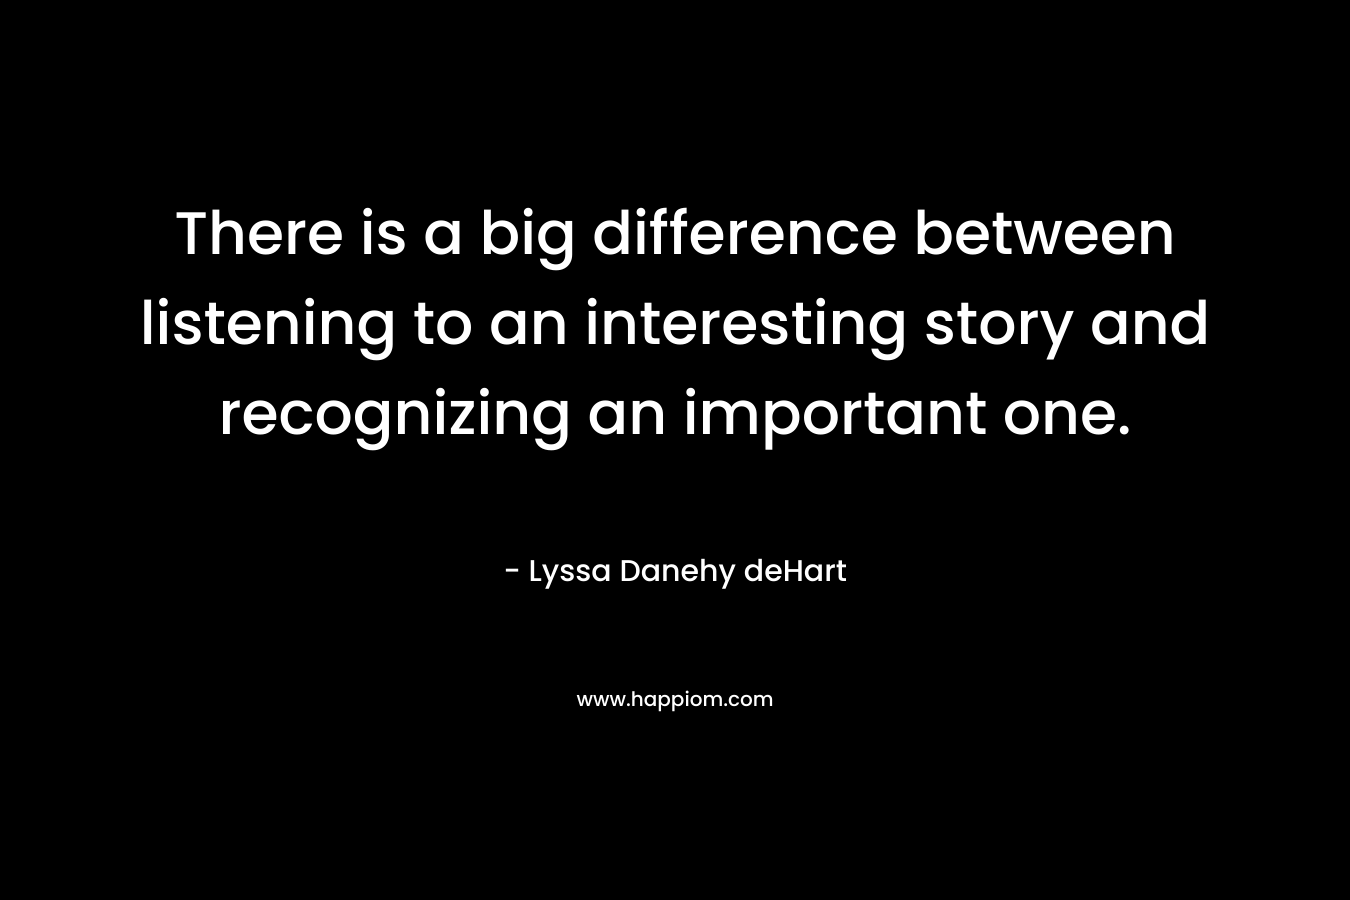 There is a big difference between listening to an interesting story and recognizing an important one.